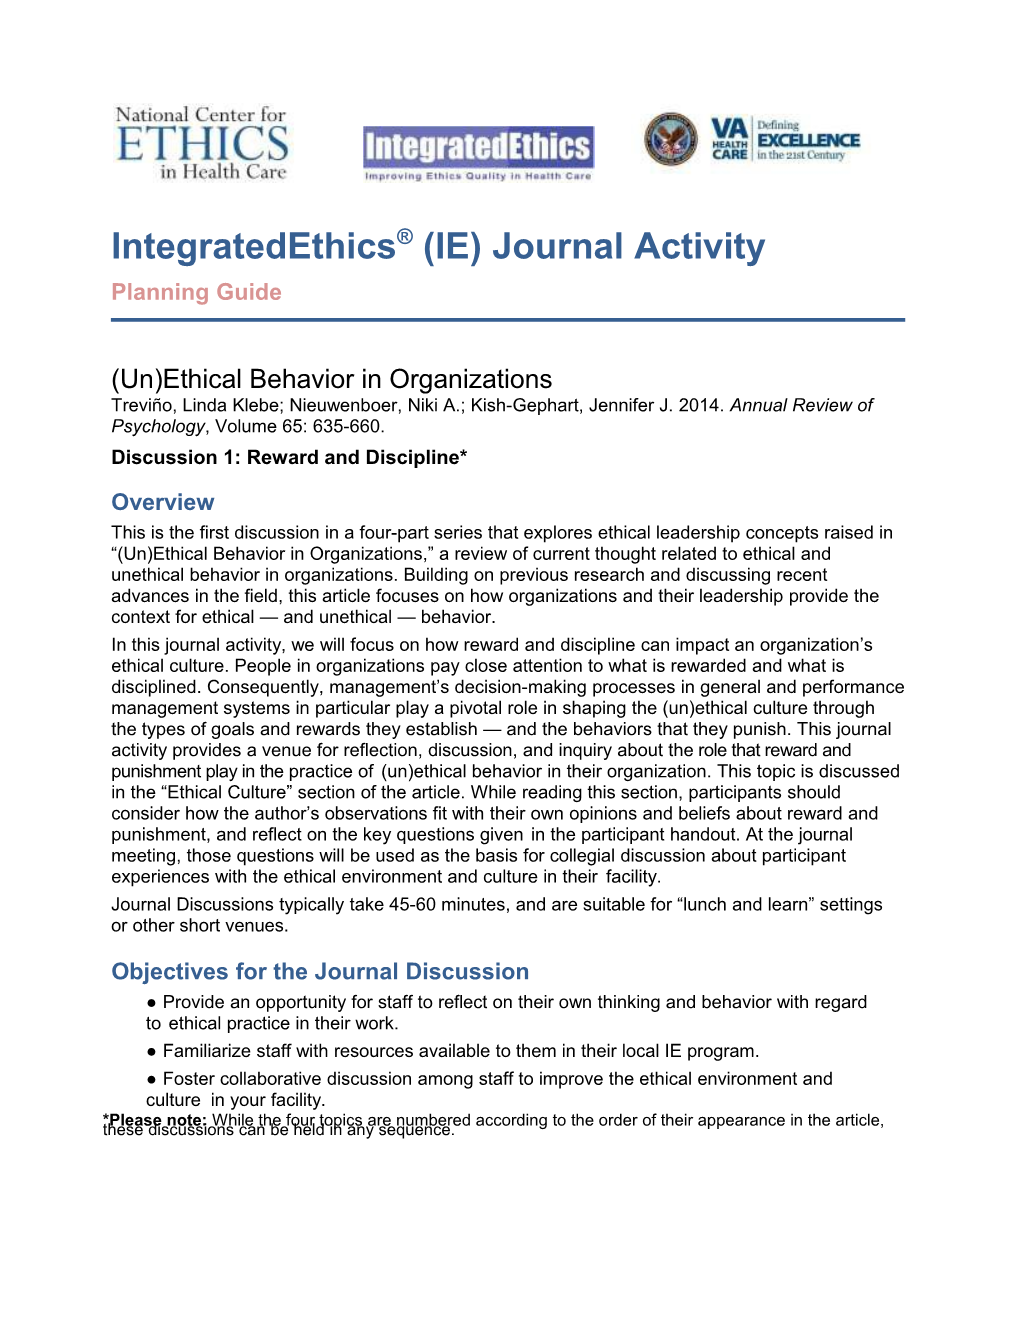 Integratedethics(TM) Journal Club Activity - Managing for Organizational Integrity - US